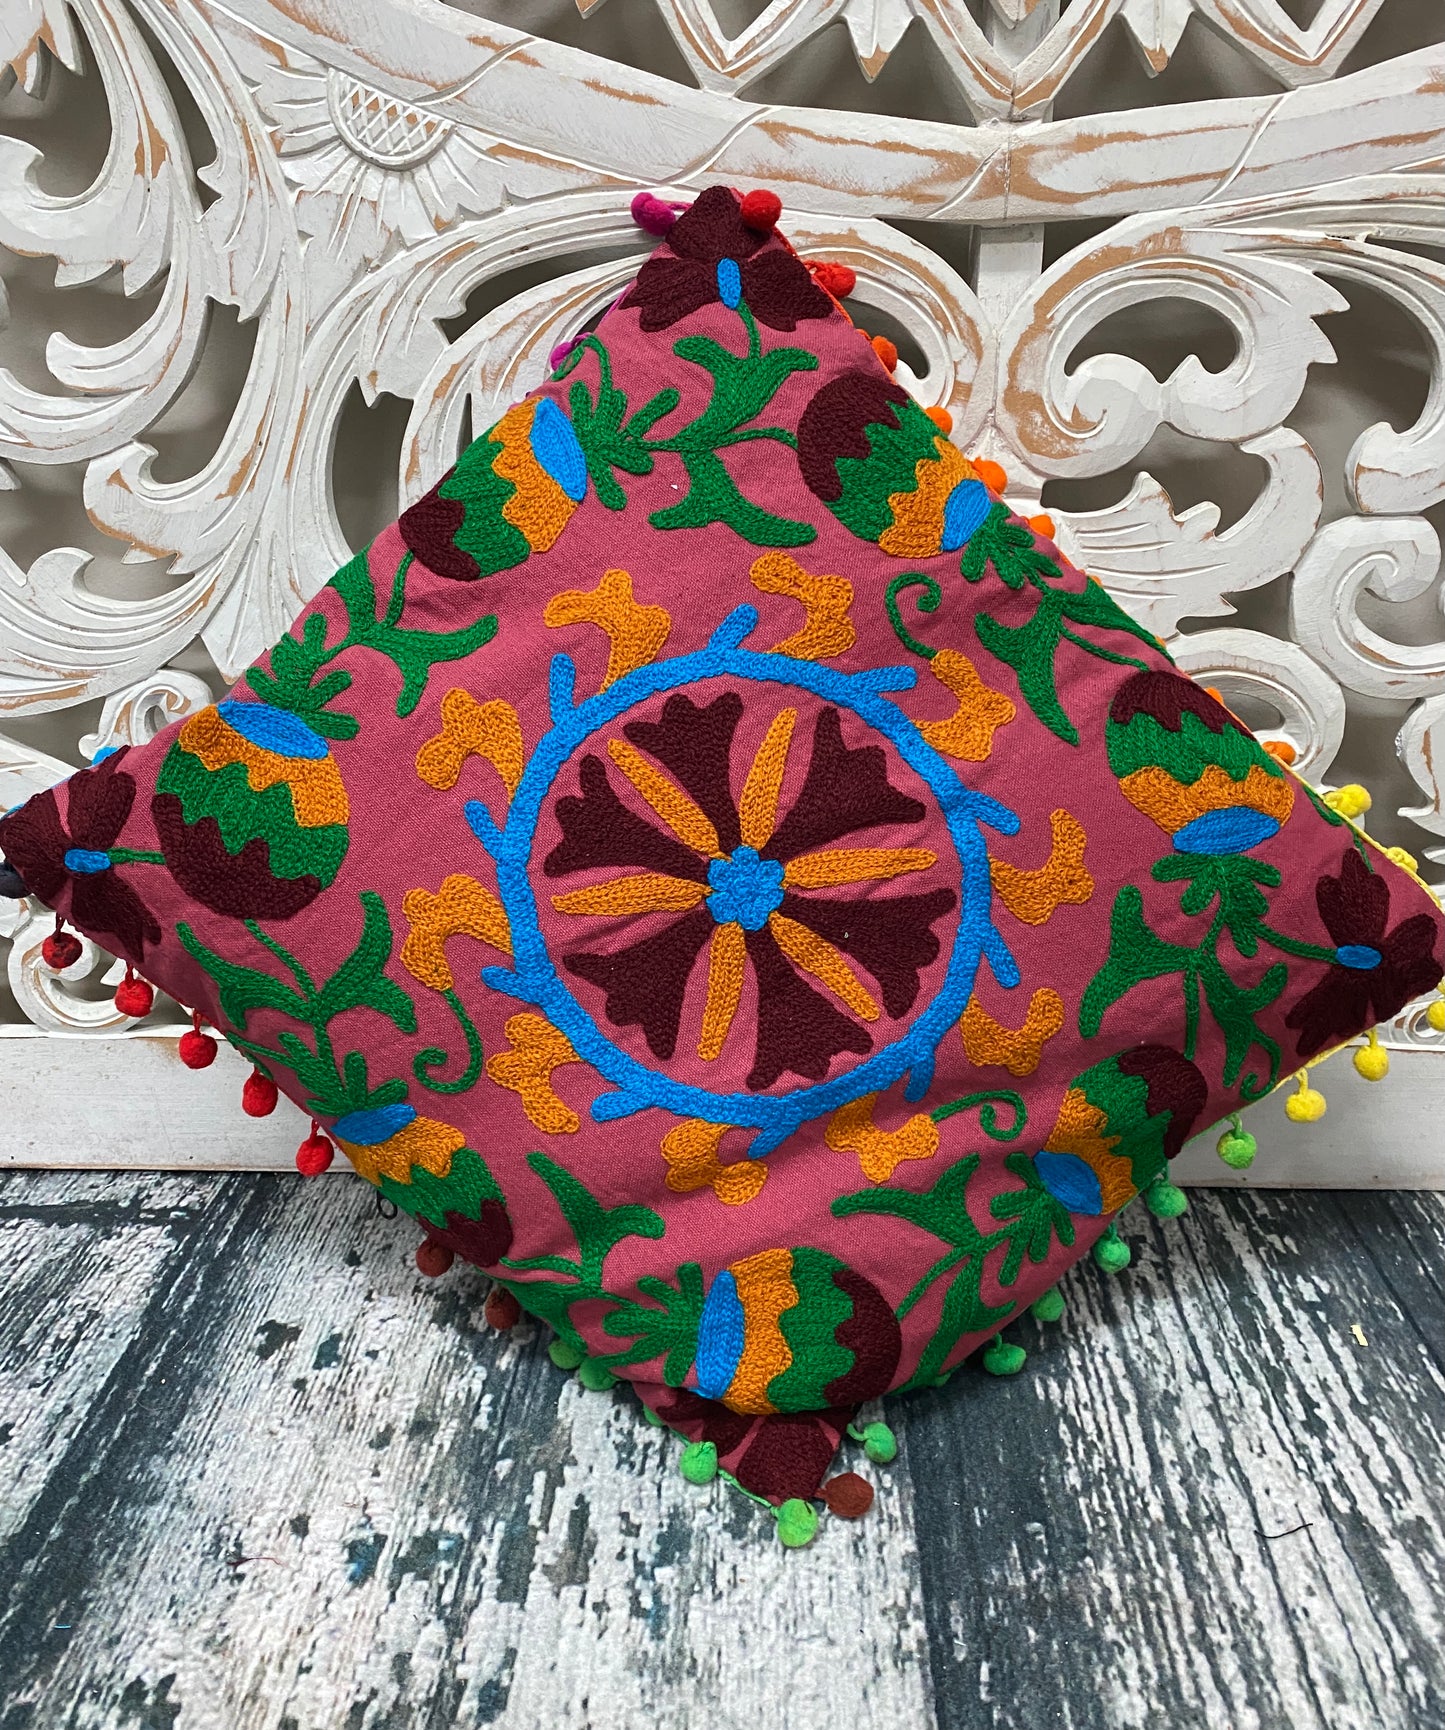 Kashmiri Style Embroidered Pillow Cases with Pom Pom Borders - 10 Colors